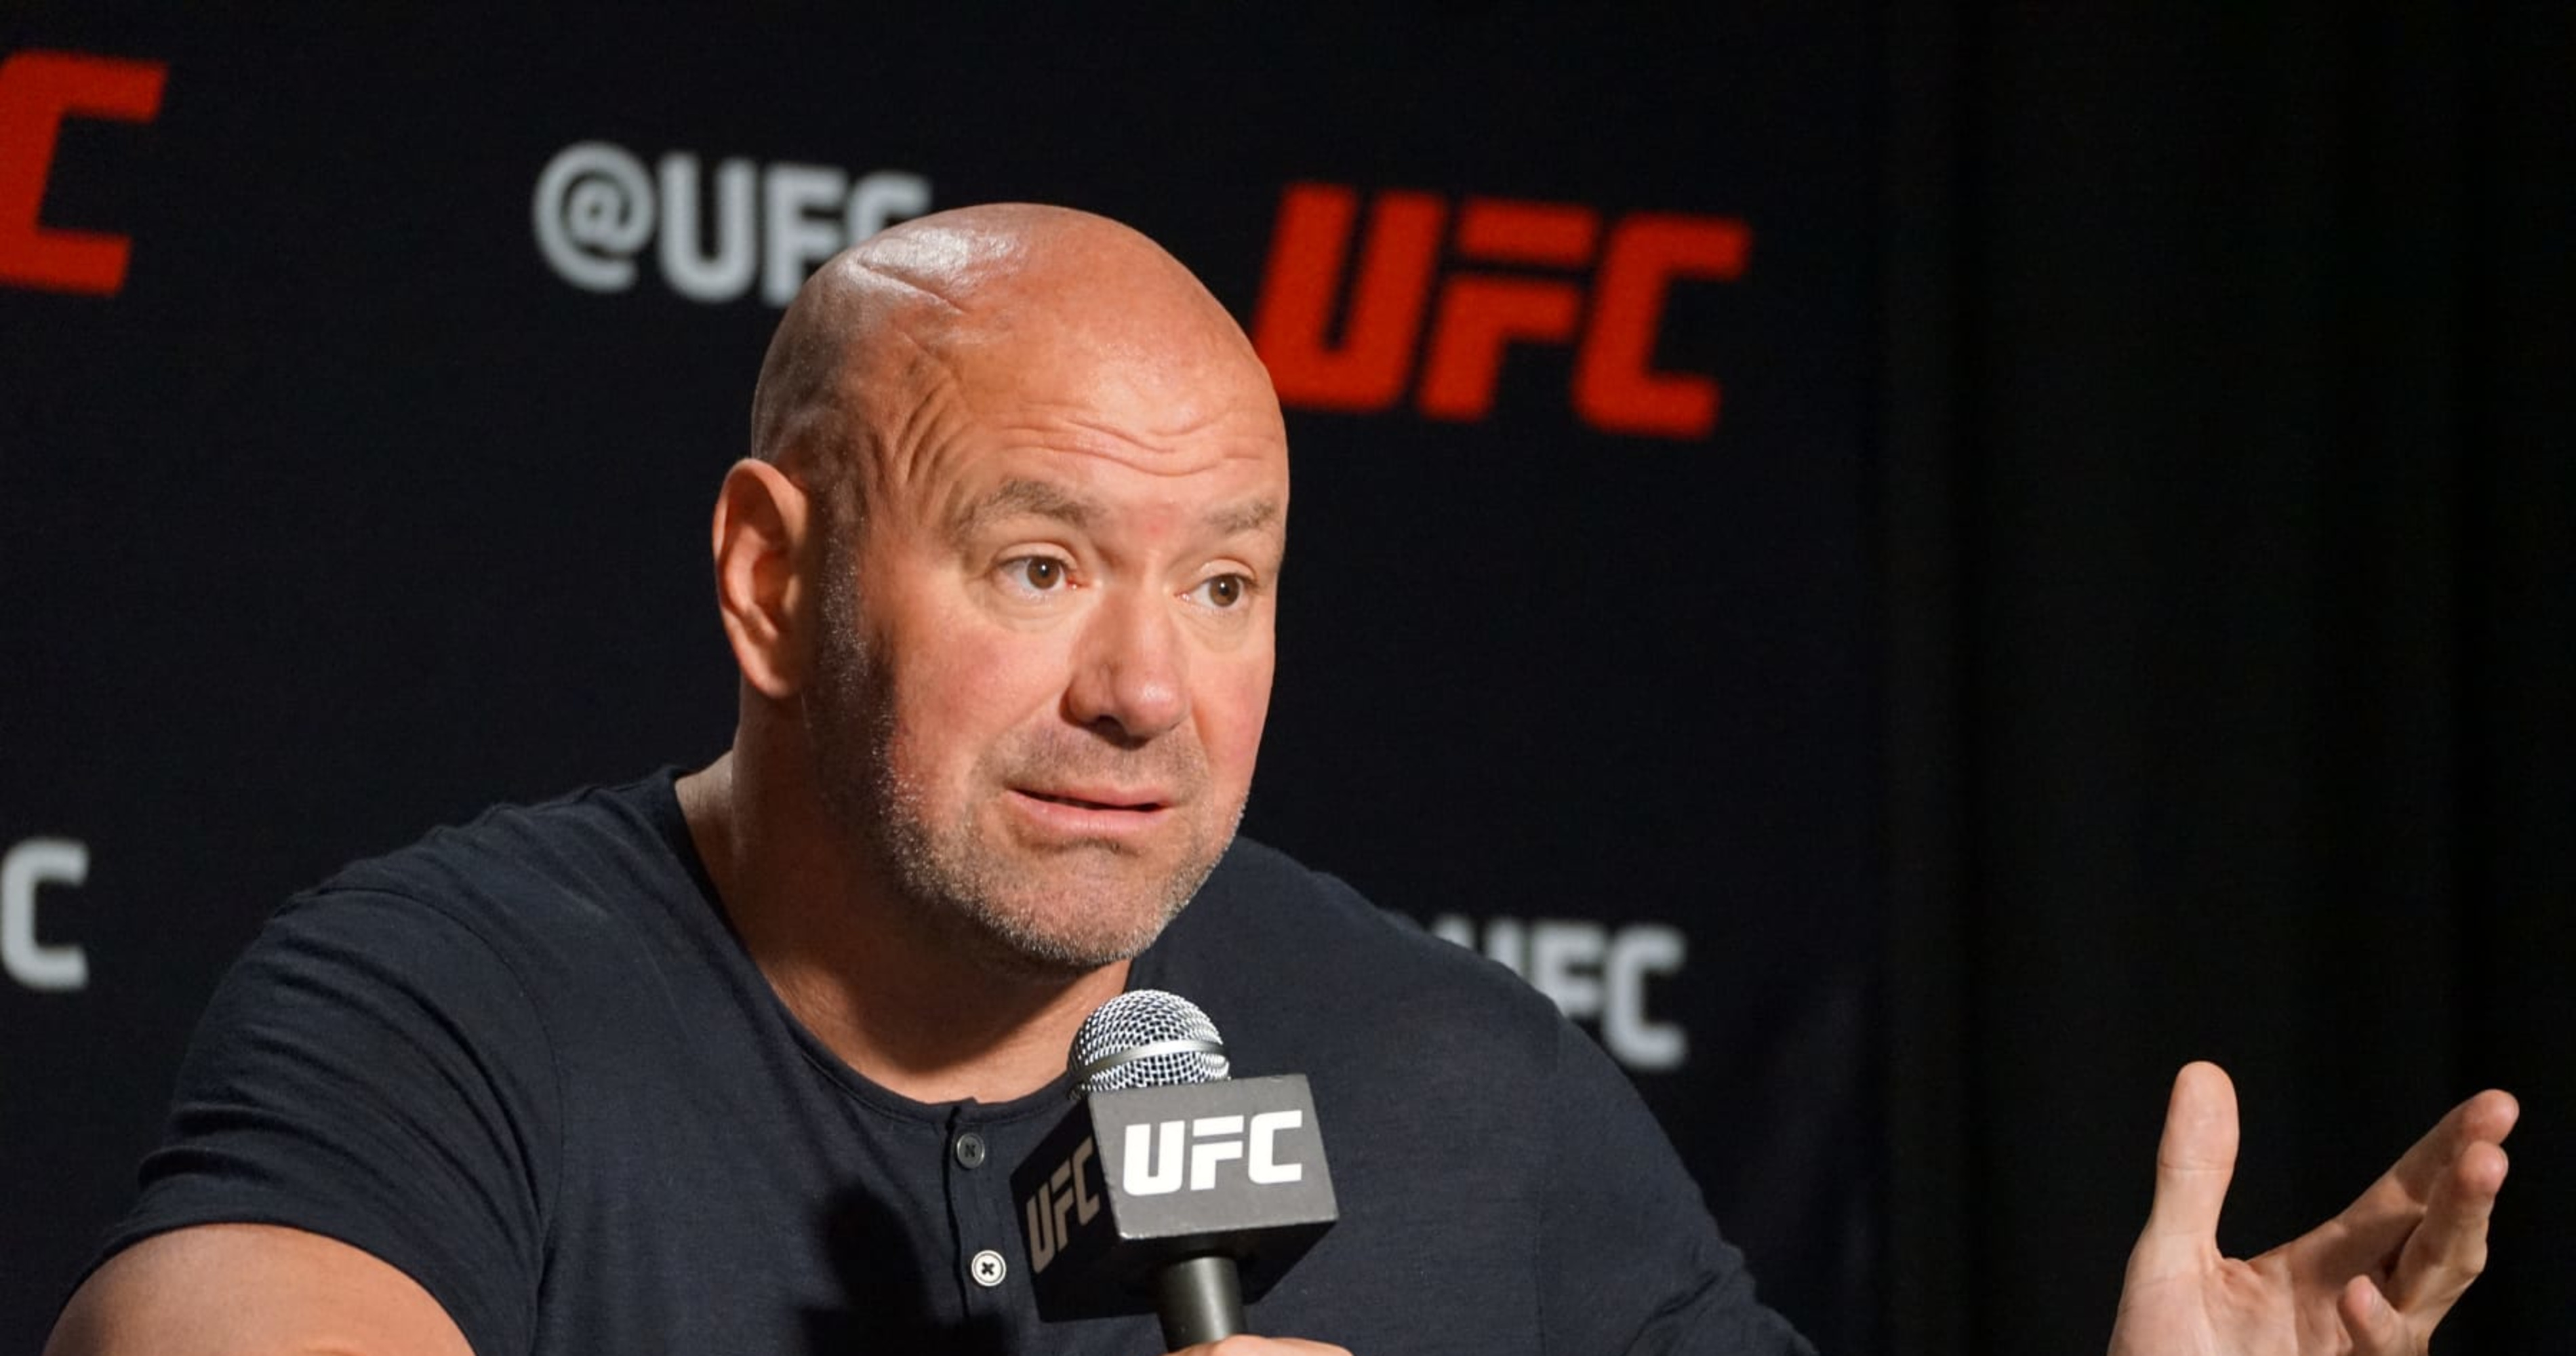 Dana White Says Raising UFC Fighters' Pay is 'Never Gonna Happen While I'm Here'